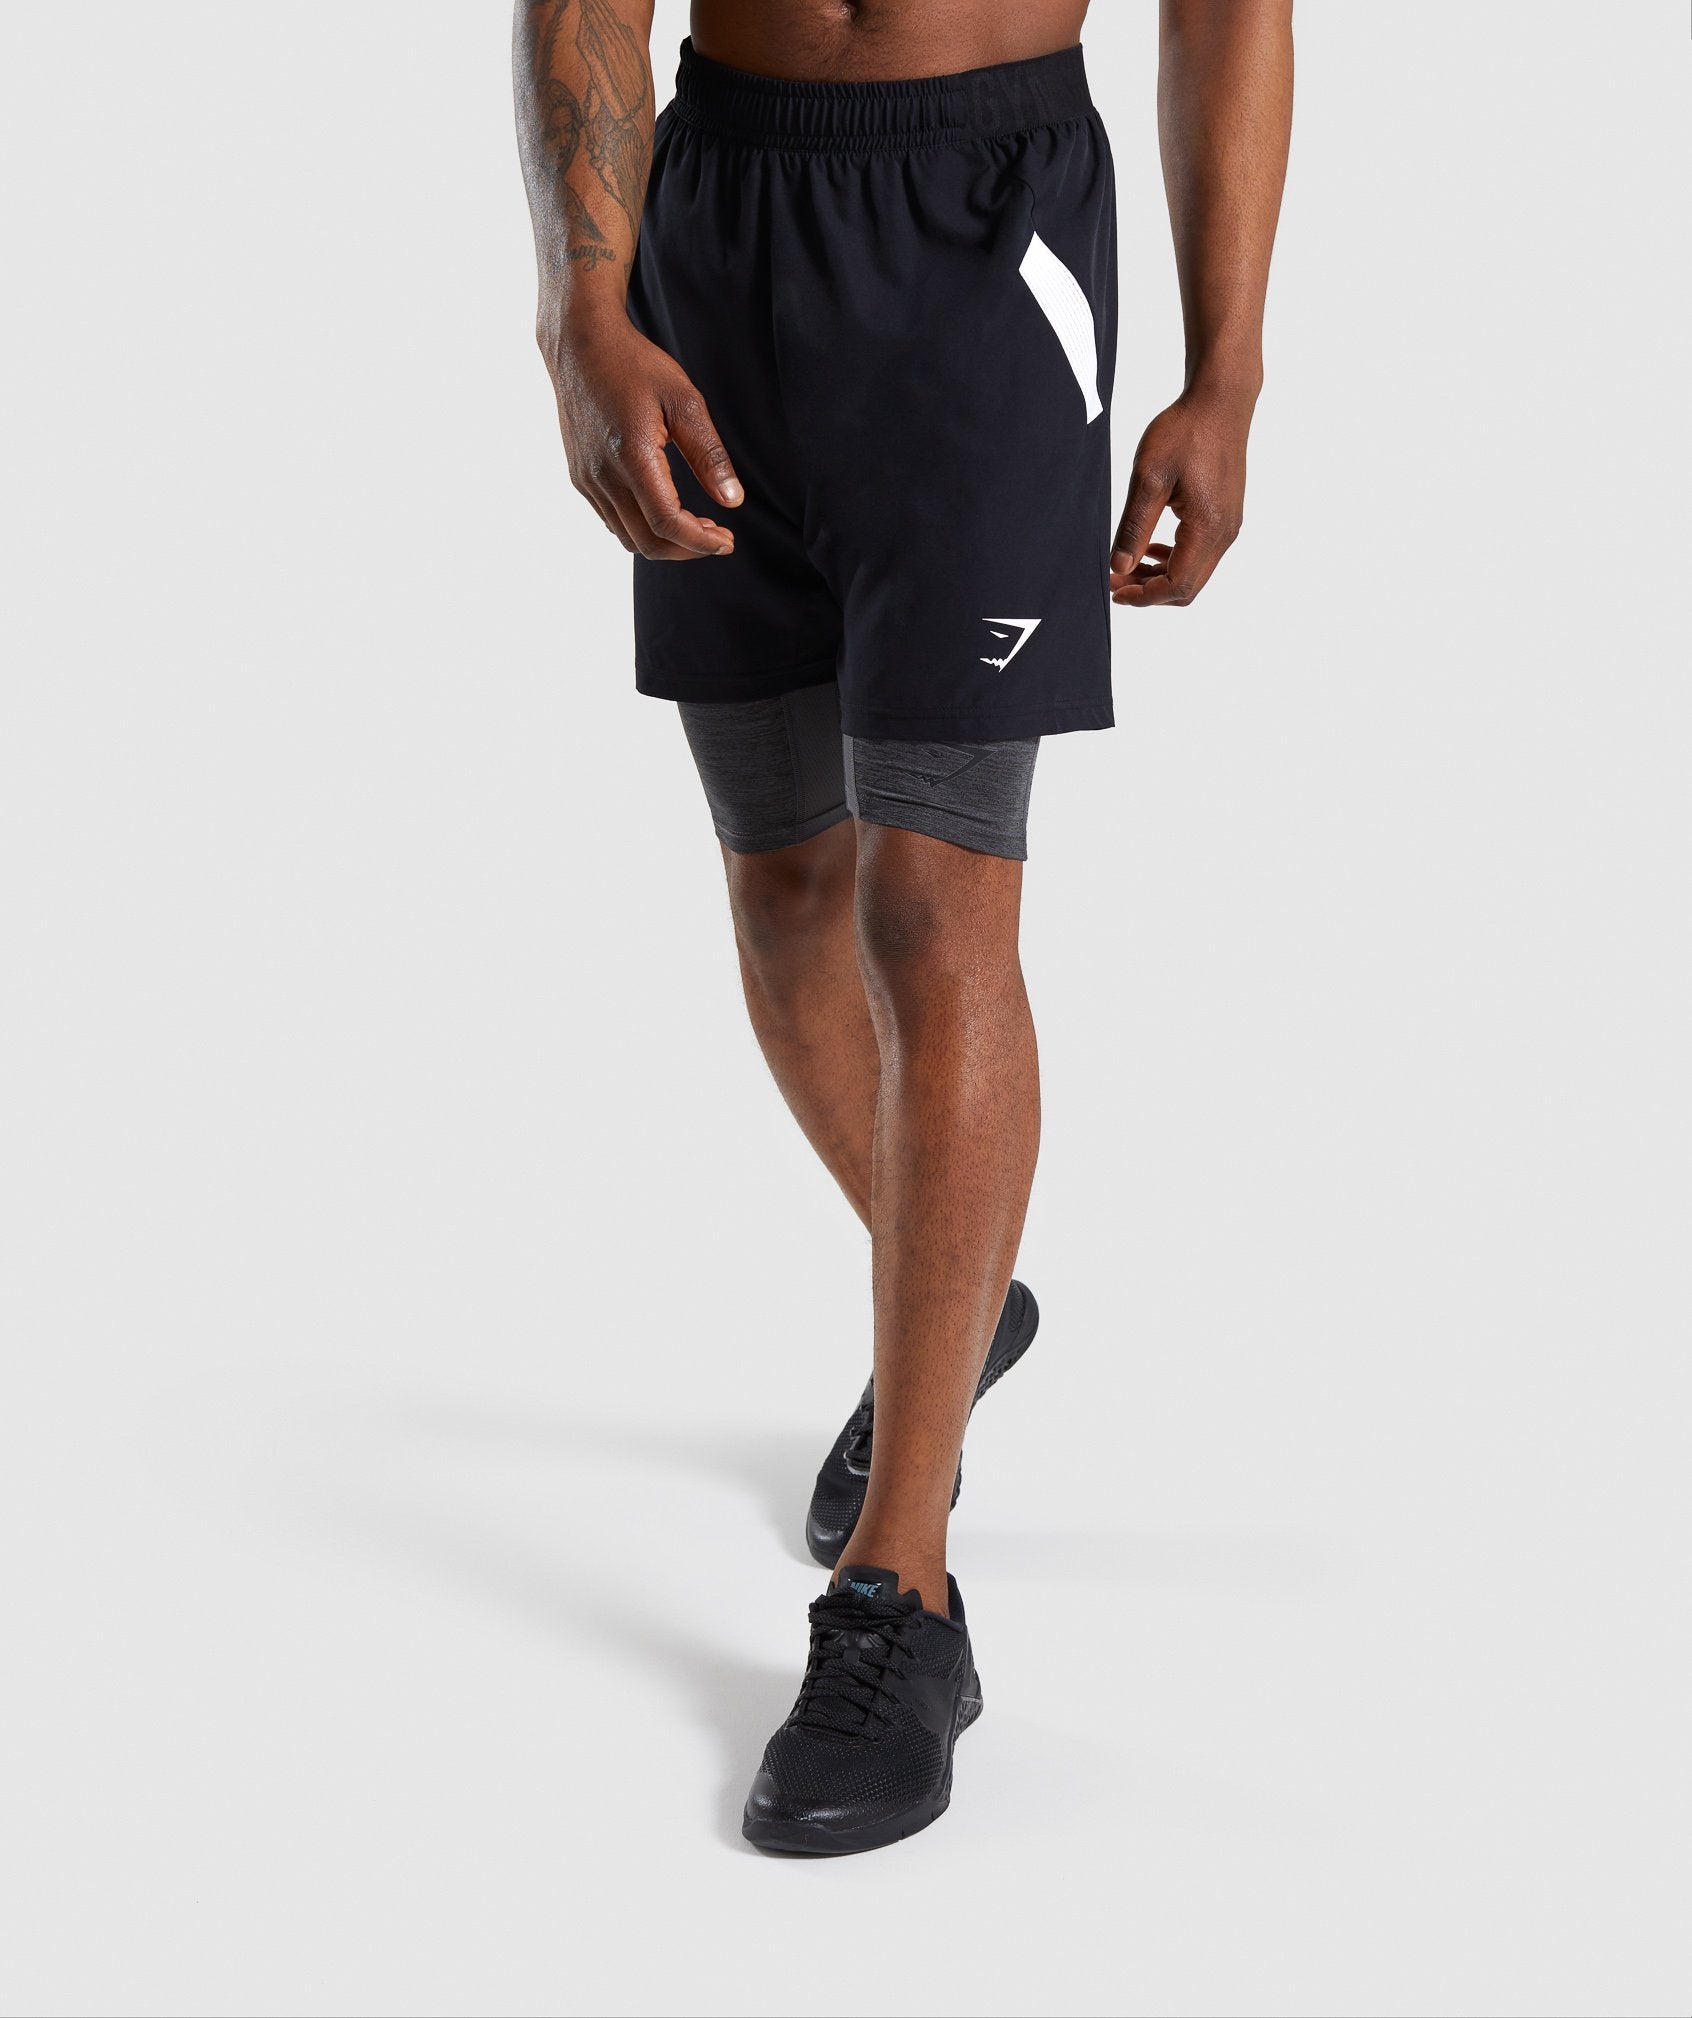 Element+ Baselayer Shorts in Black Marl - view 3